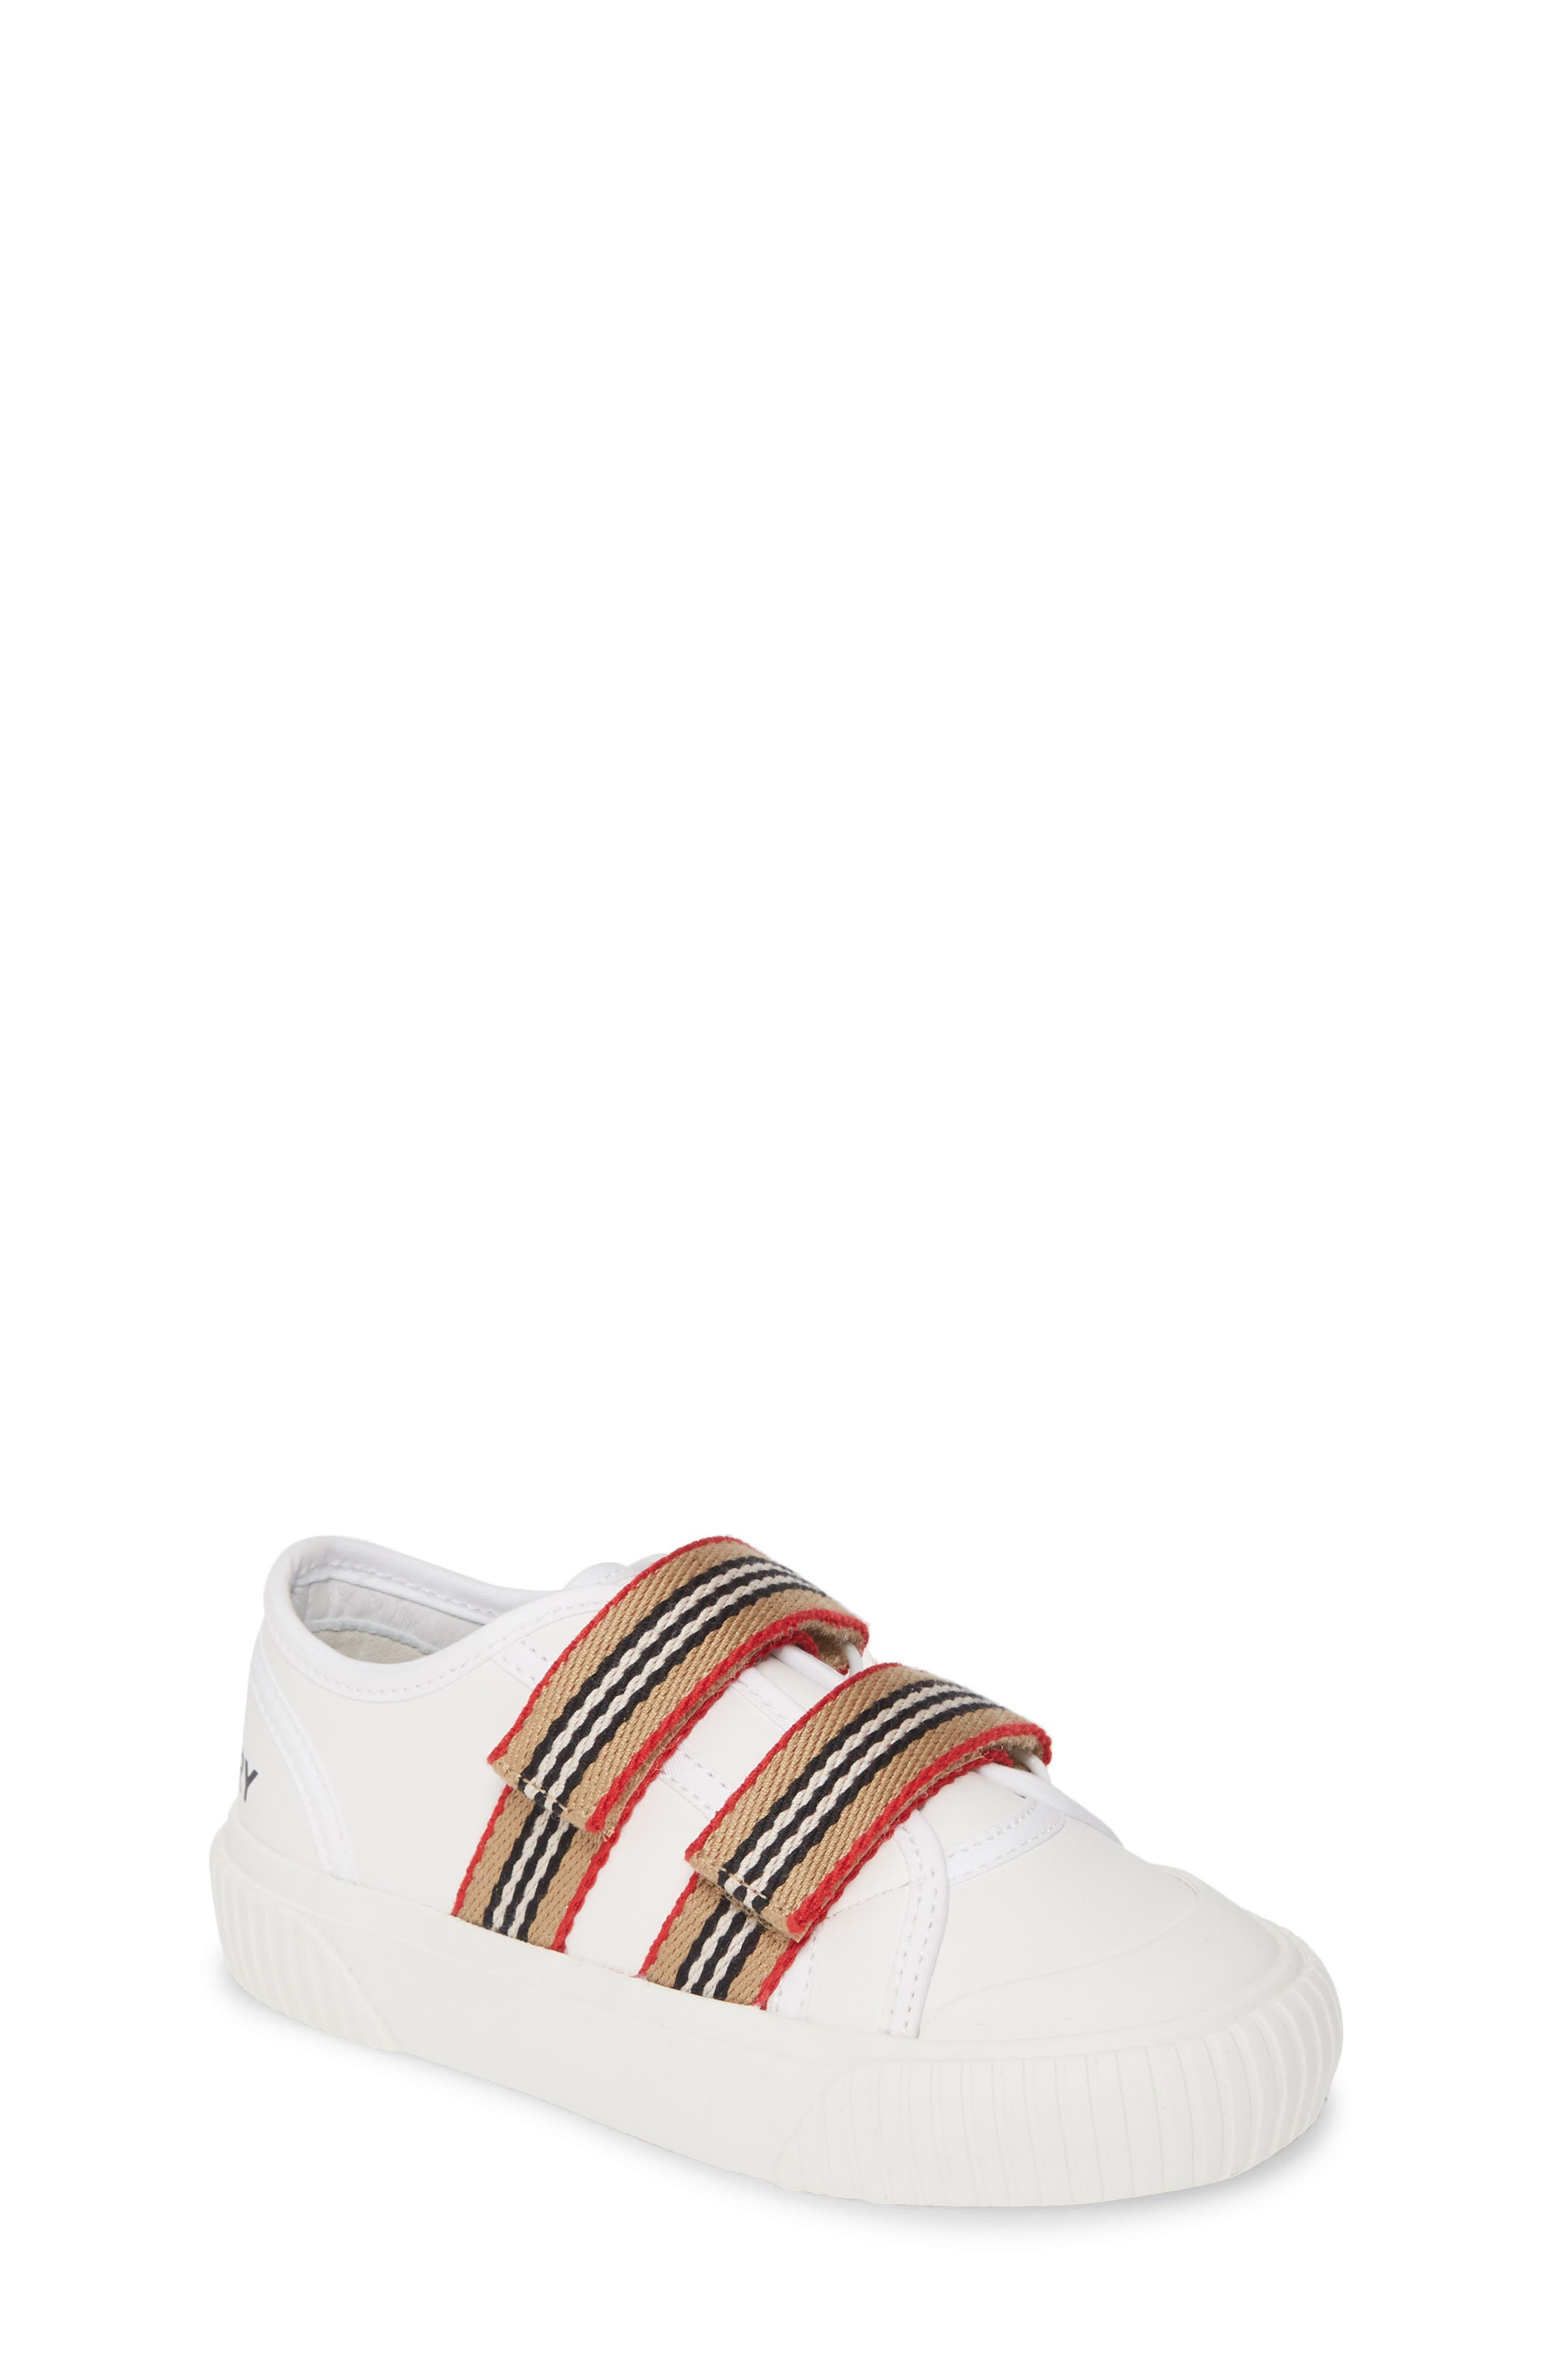 burberry sneakers for toddlers